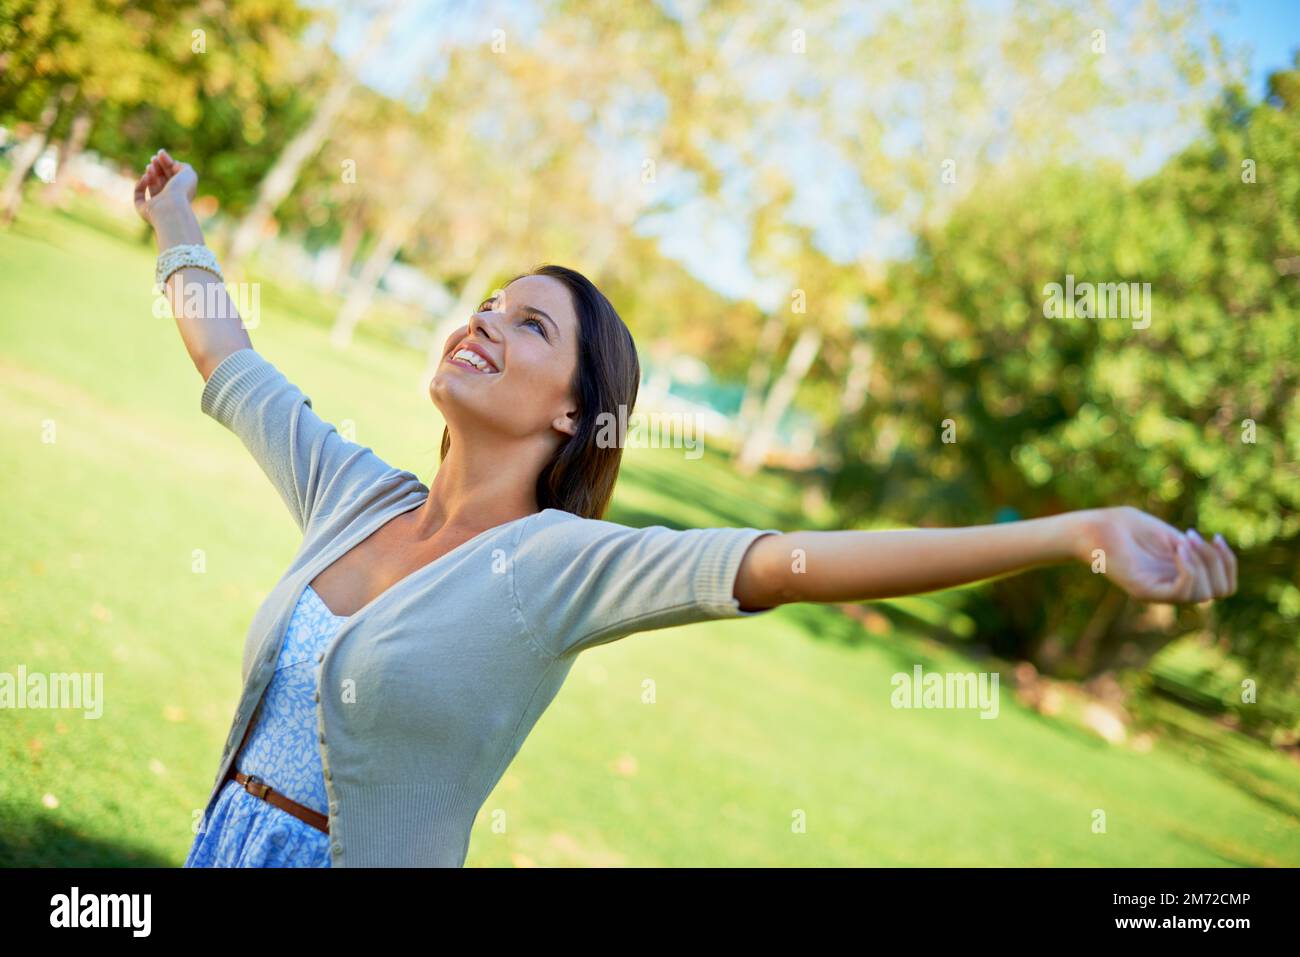 Feeling free. a carefree young woman enjoying a day at the park. Stock Photo